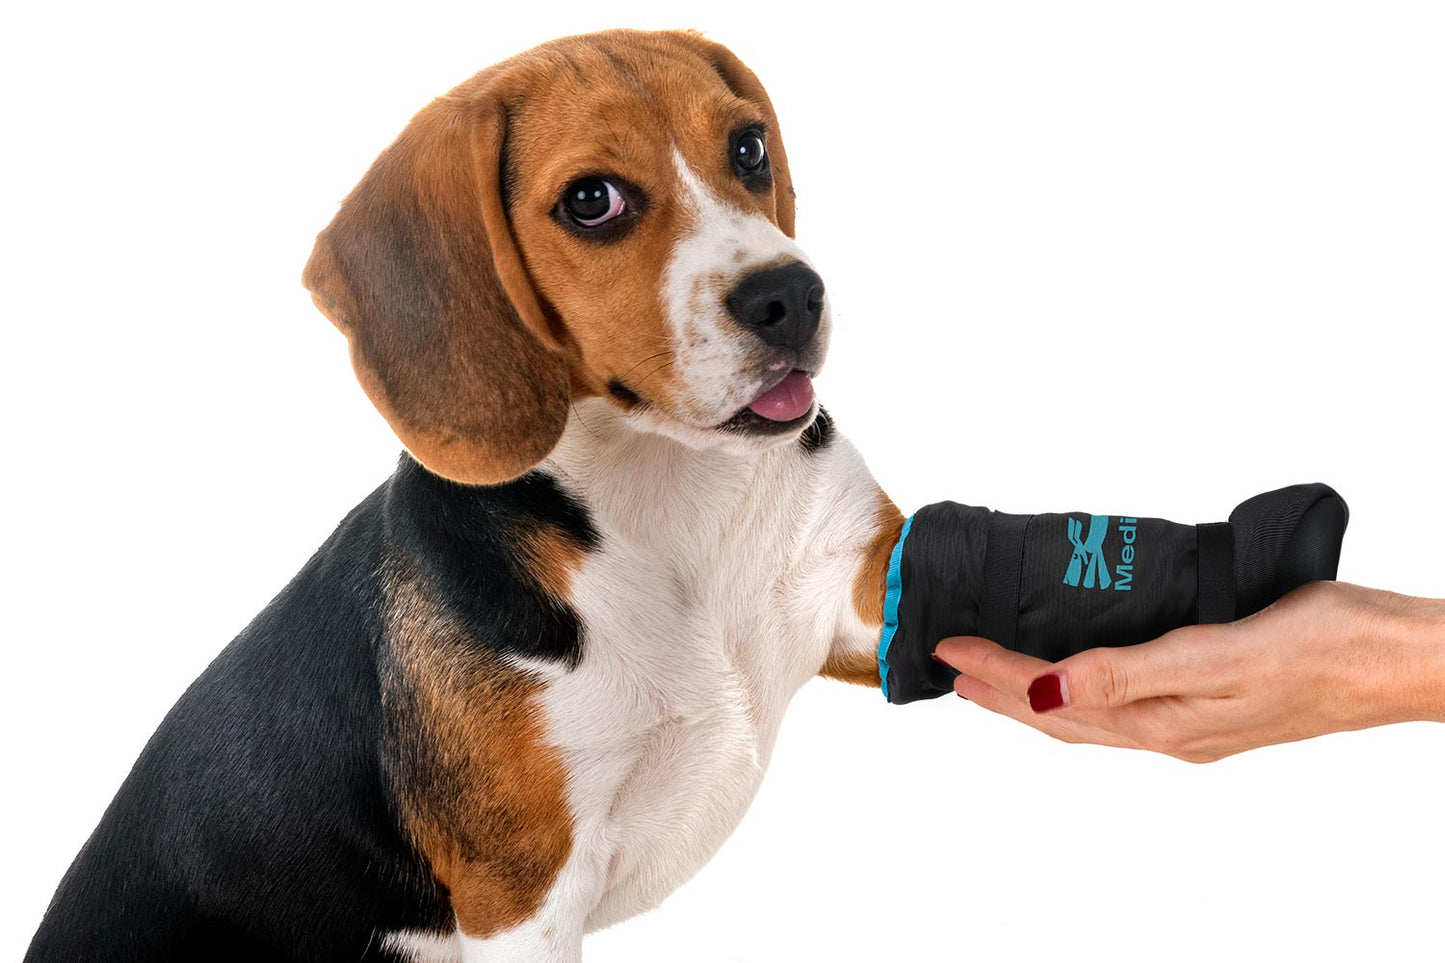 A beagle is being held by a person wearing Your Whole Dog's MediPaw: Soft Bandage (Basic) Boot.